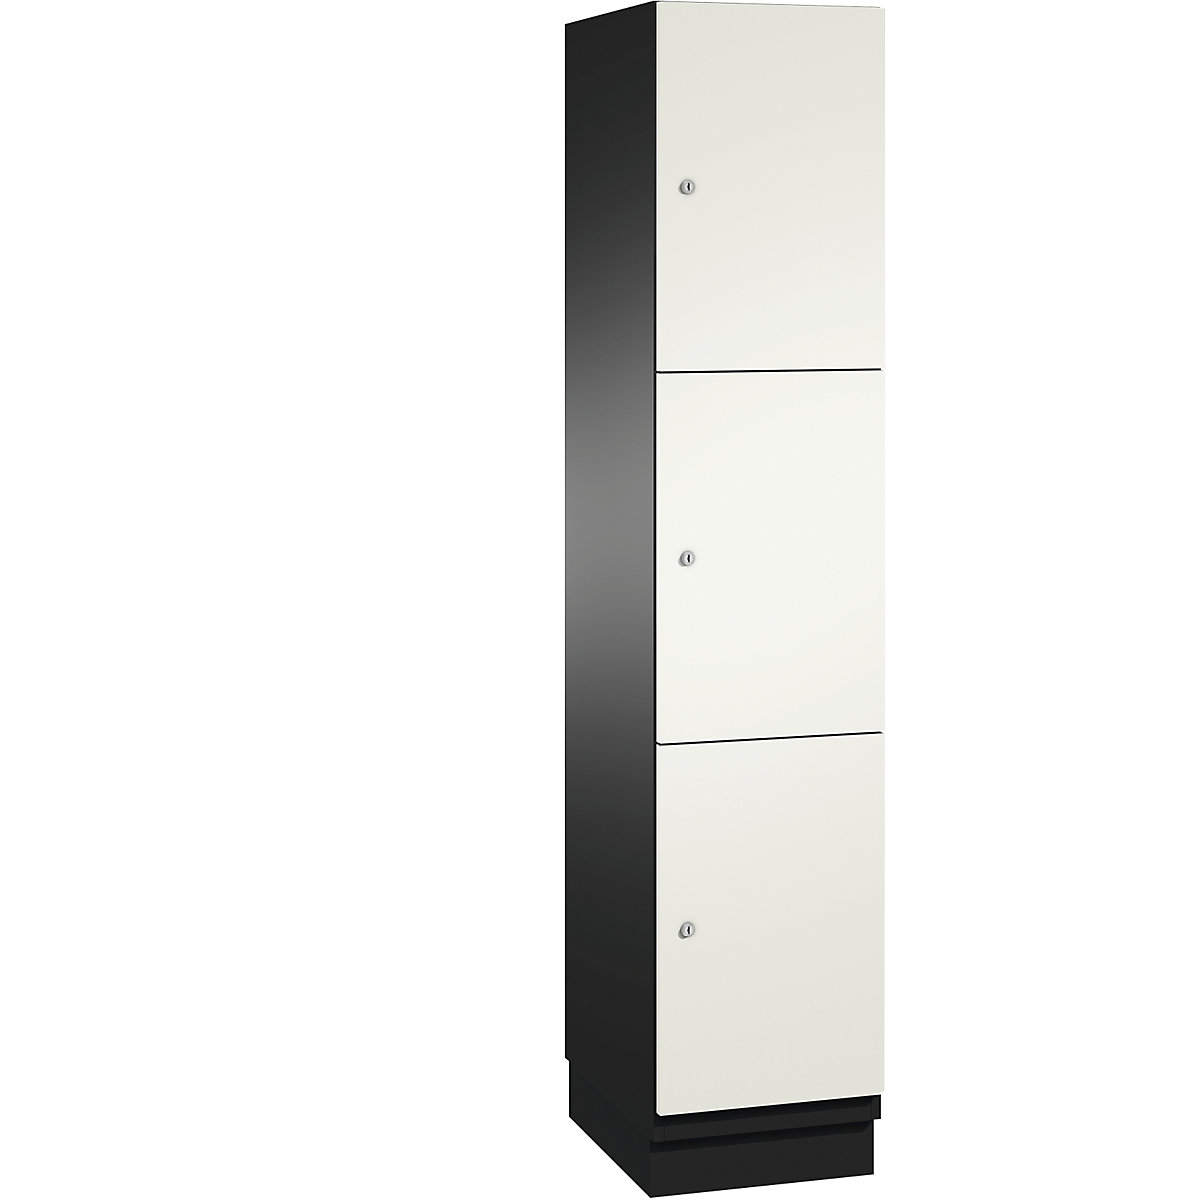 CAMBIO compartment locker with sheet steel doors – C+P, 3 compartments, width 400 mm, body black grey / door pure white-9